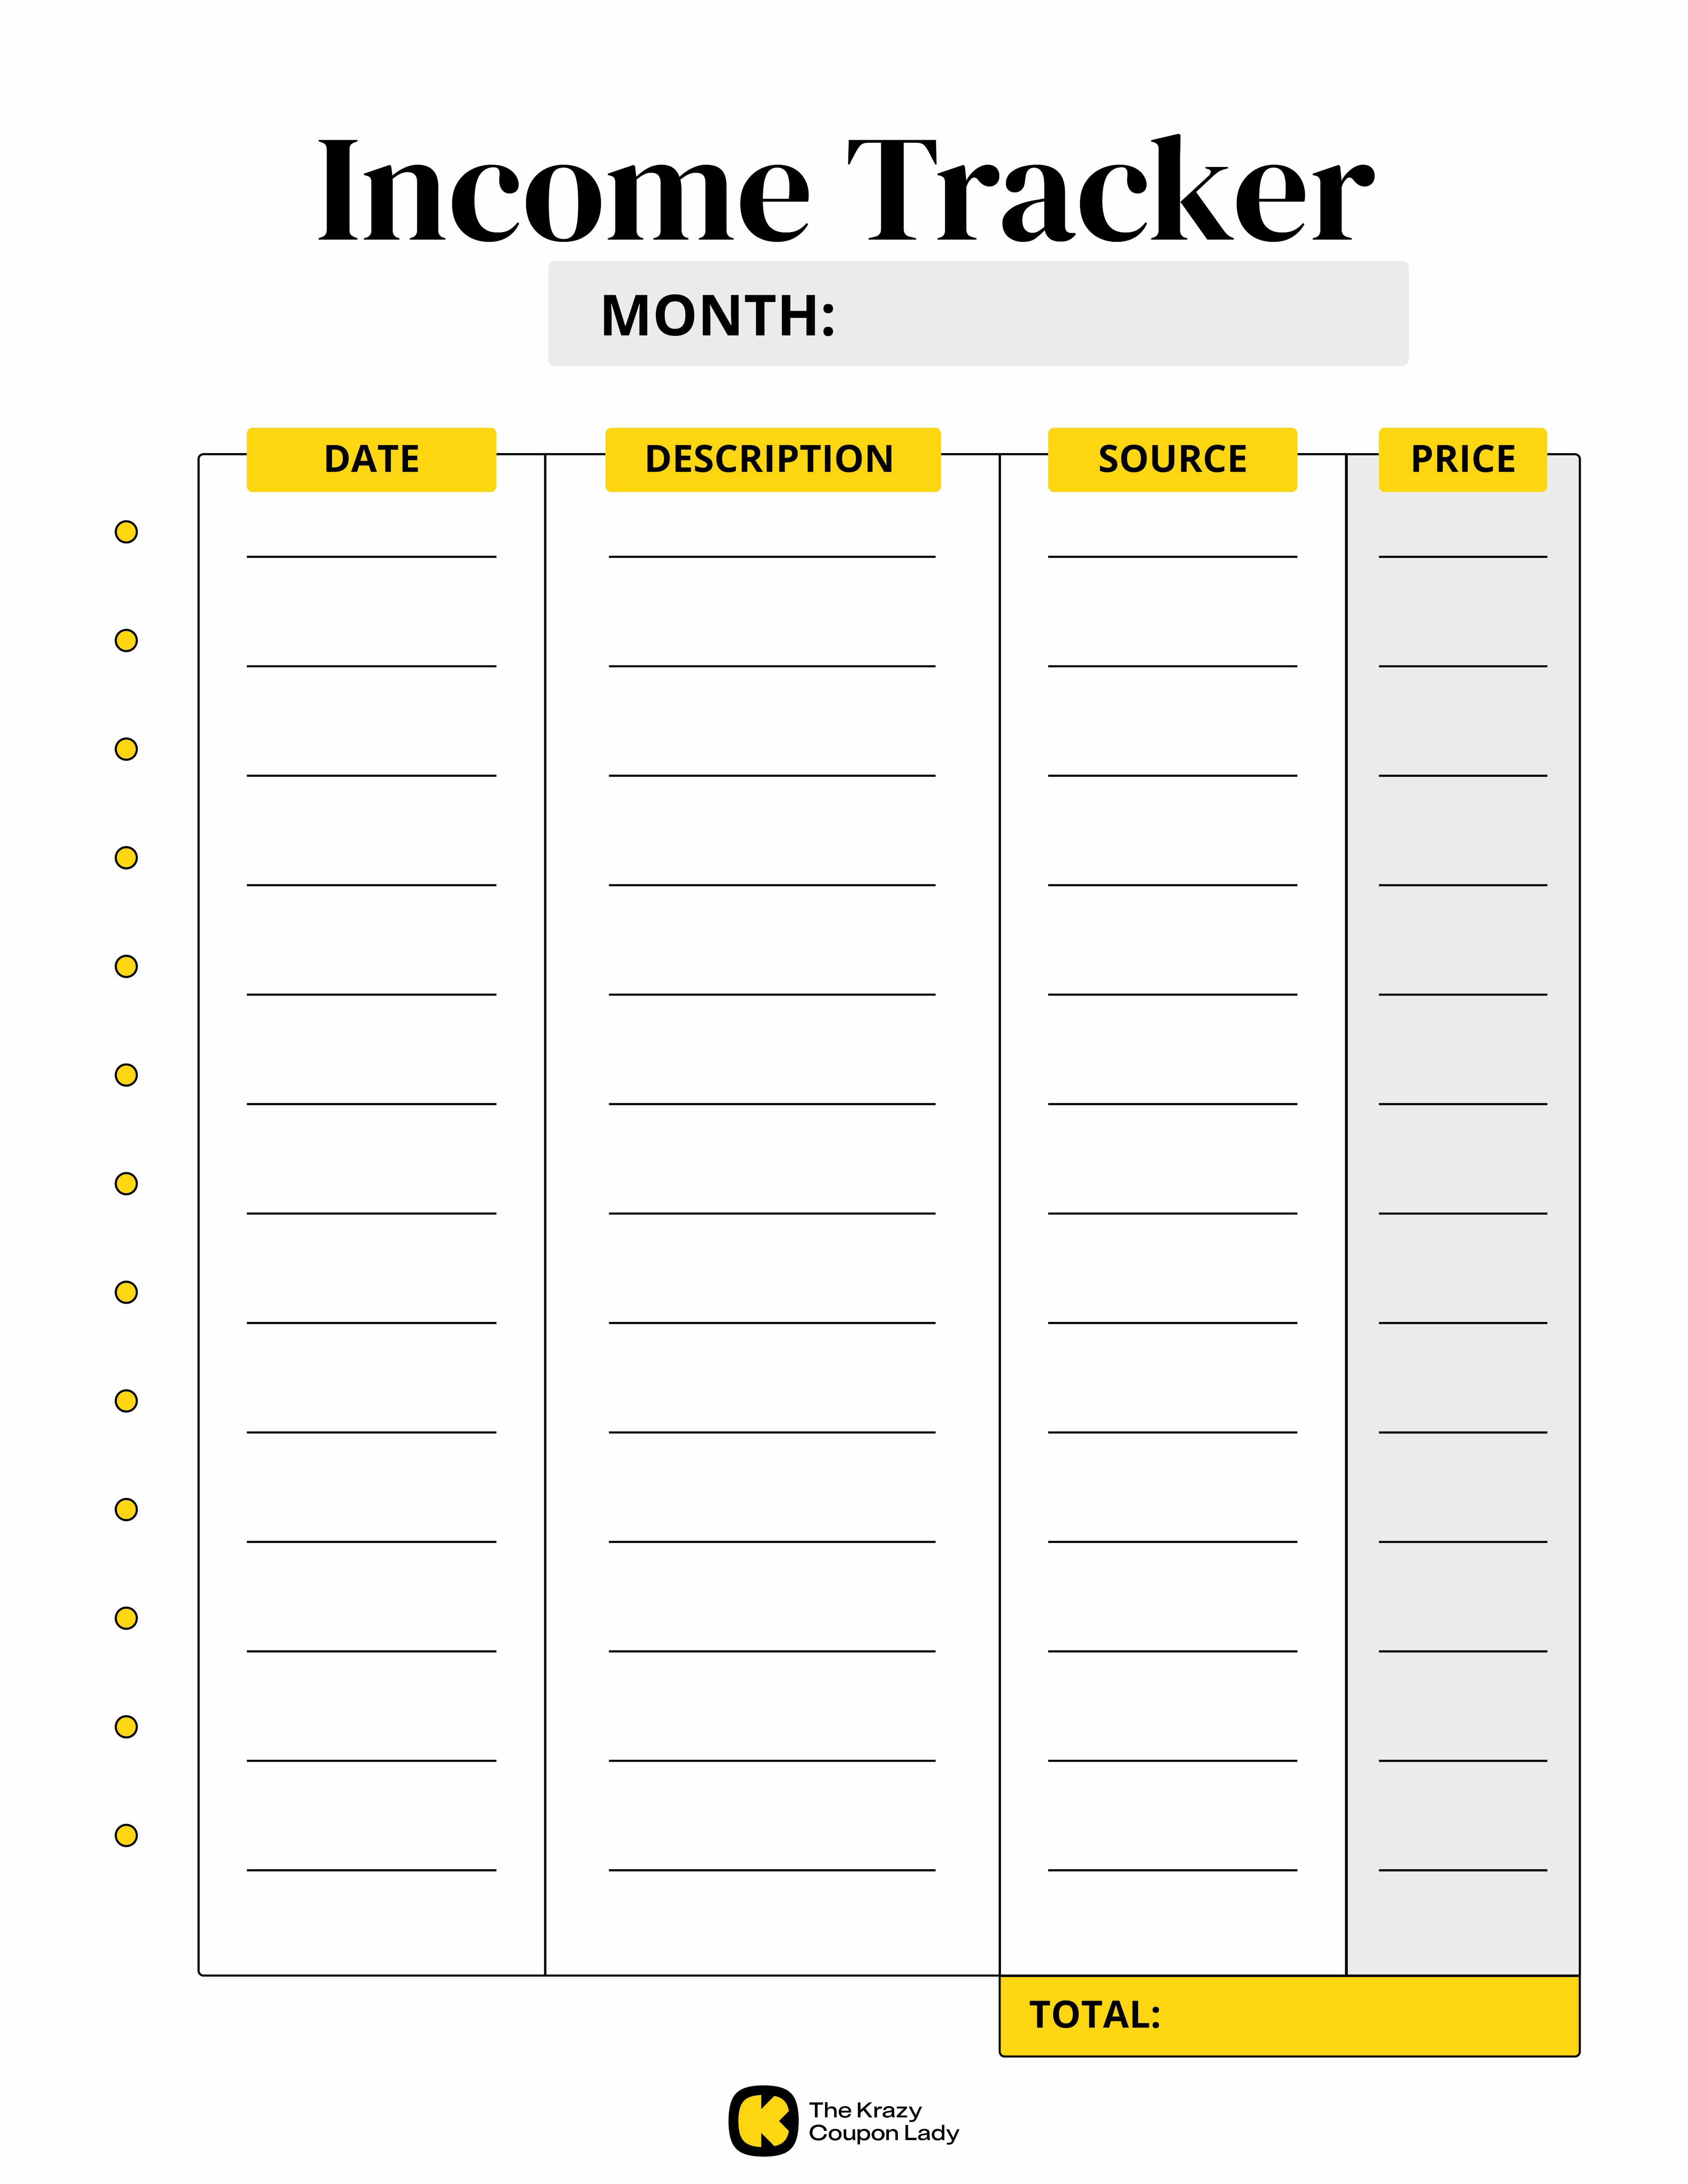 a monthly income tracker from KCL